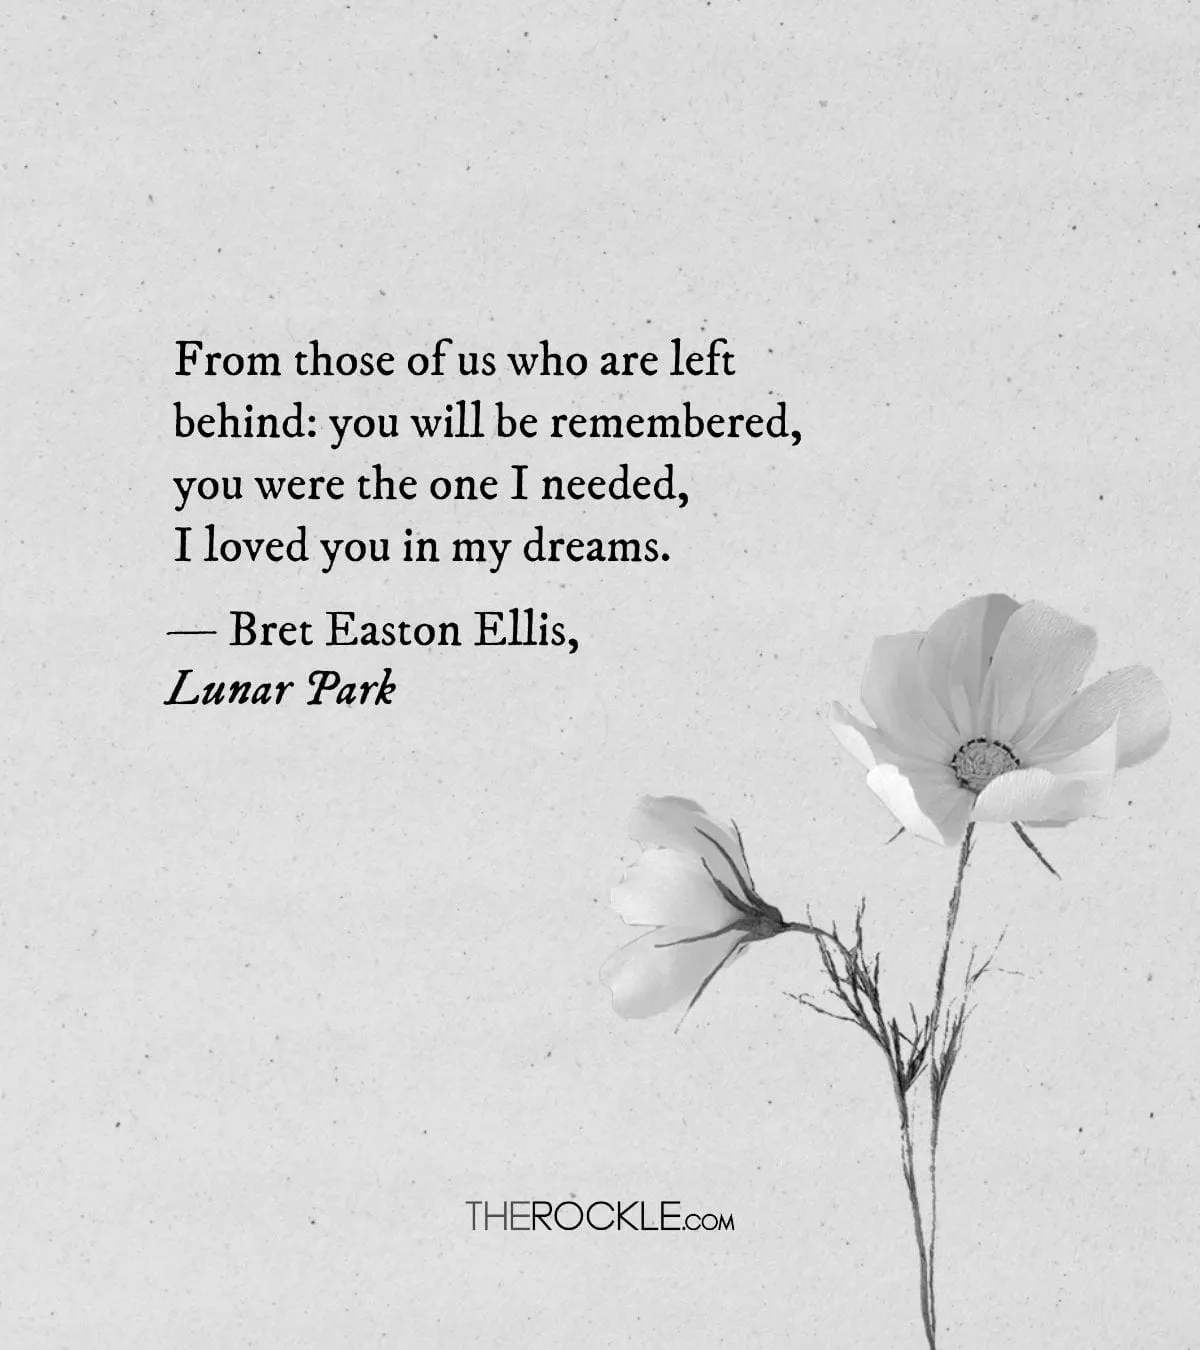 Bret Easton Ellis on remembrance and love